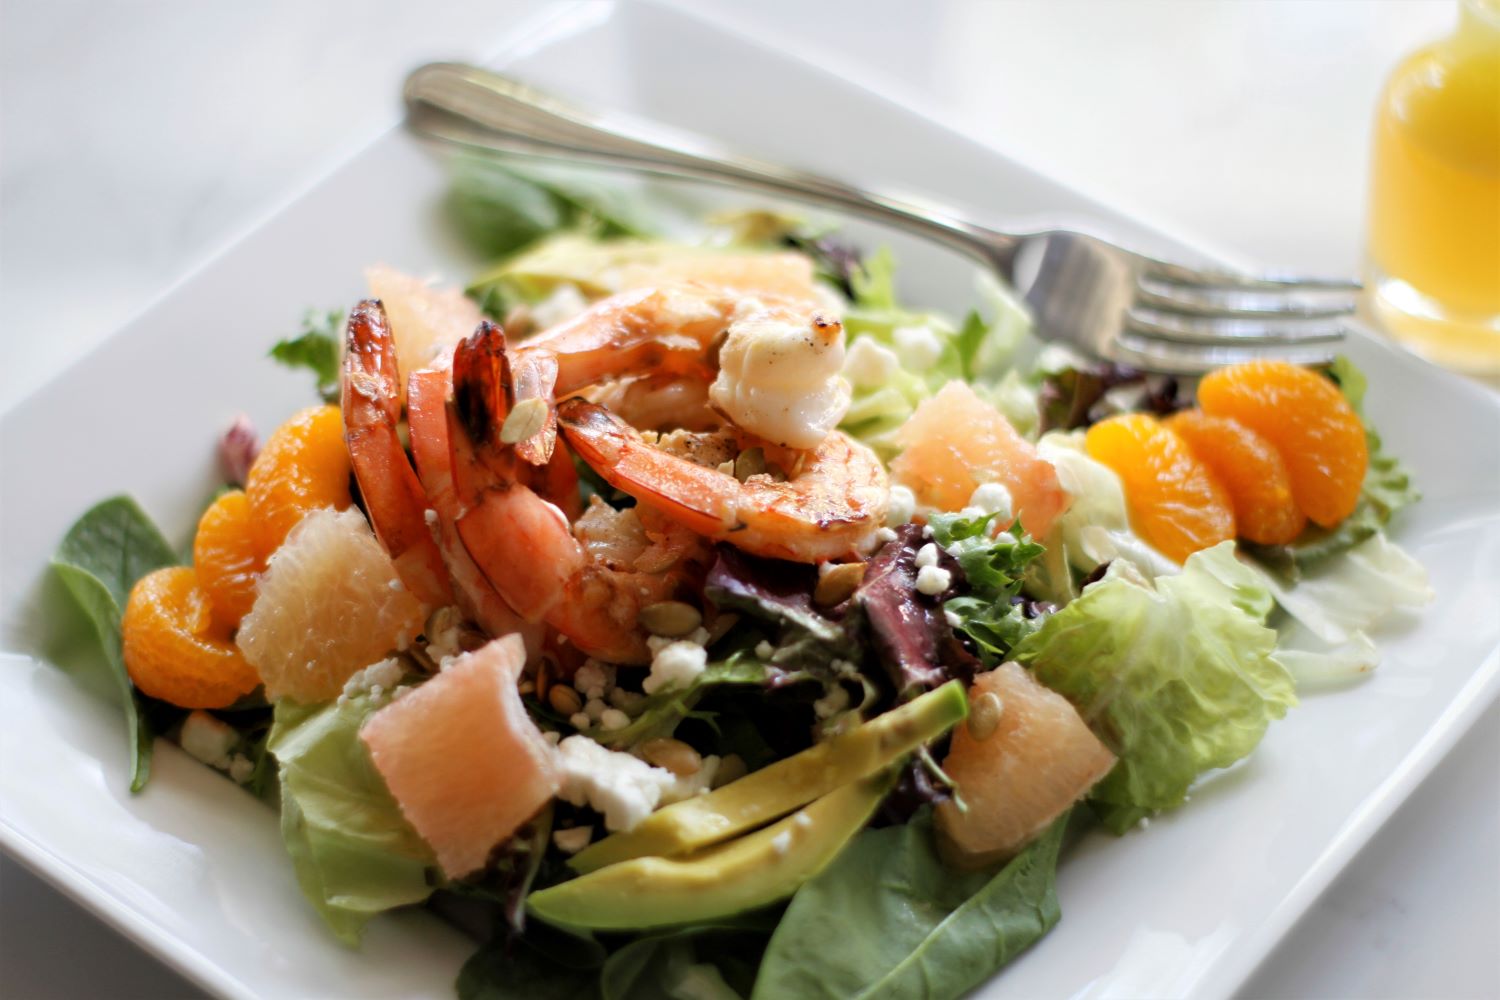 Grilled shrimp in a salad with avocado, grapefruit, madarin oranges and goat cheese